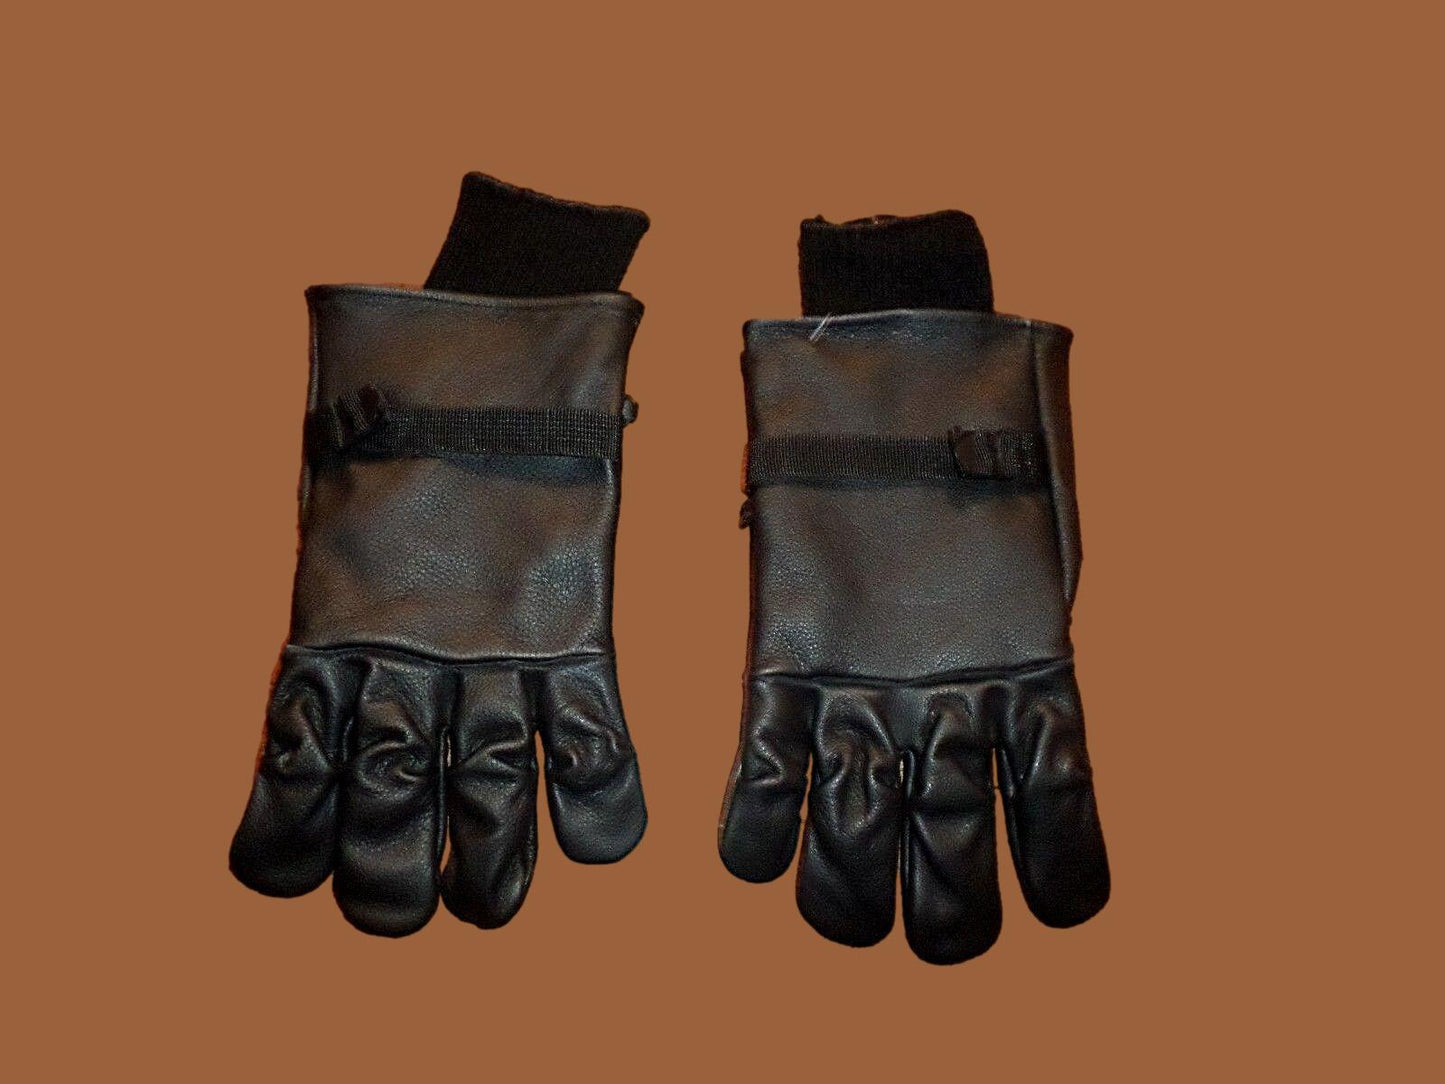 U.S MILITARY STYLE D-3A LEATHER GLOVES COLD WEATHER SIZE 5 LARGE W/LINER